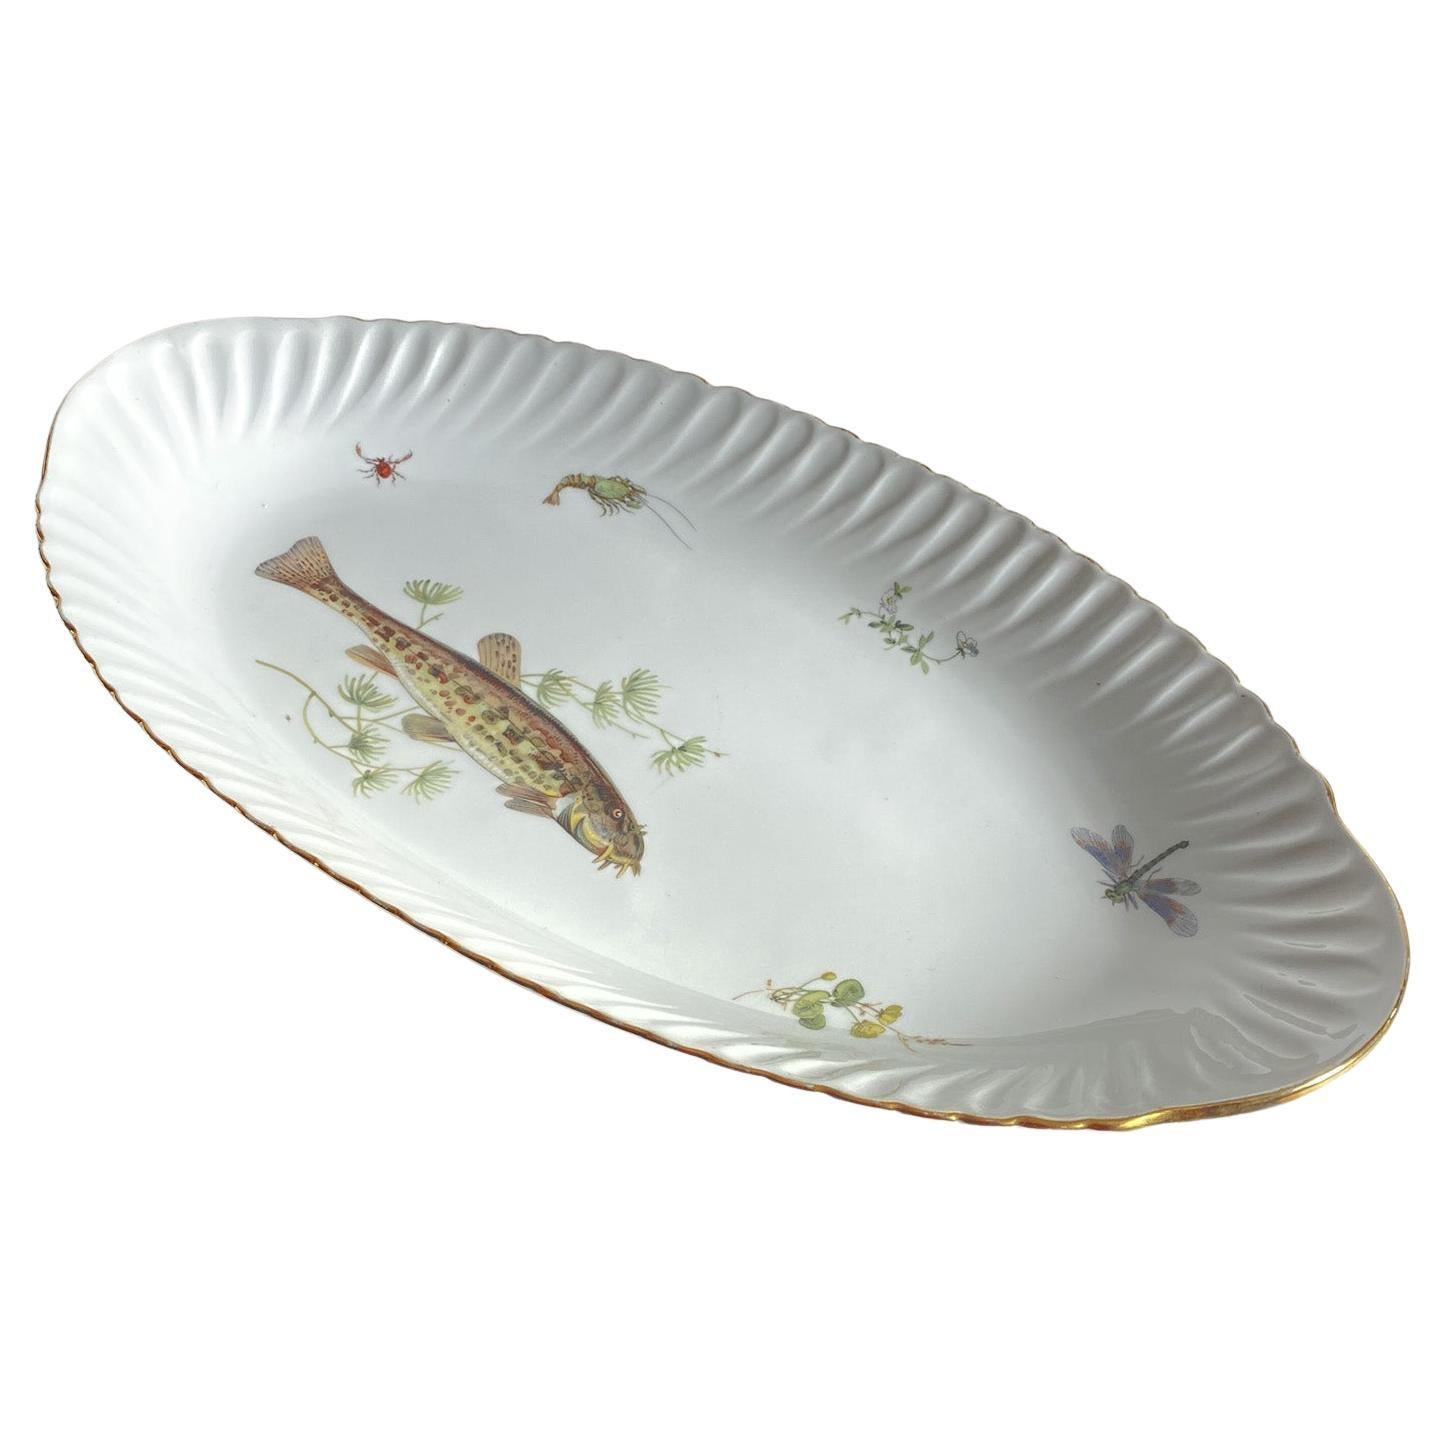 Mid-Century Modern Porcelain Fish Dish  by Limoges, France For Sale